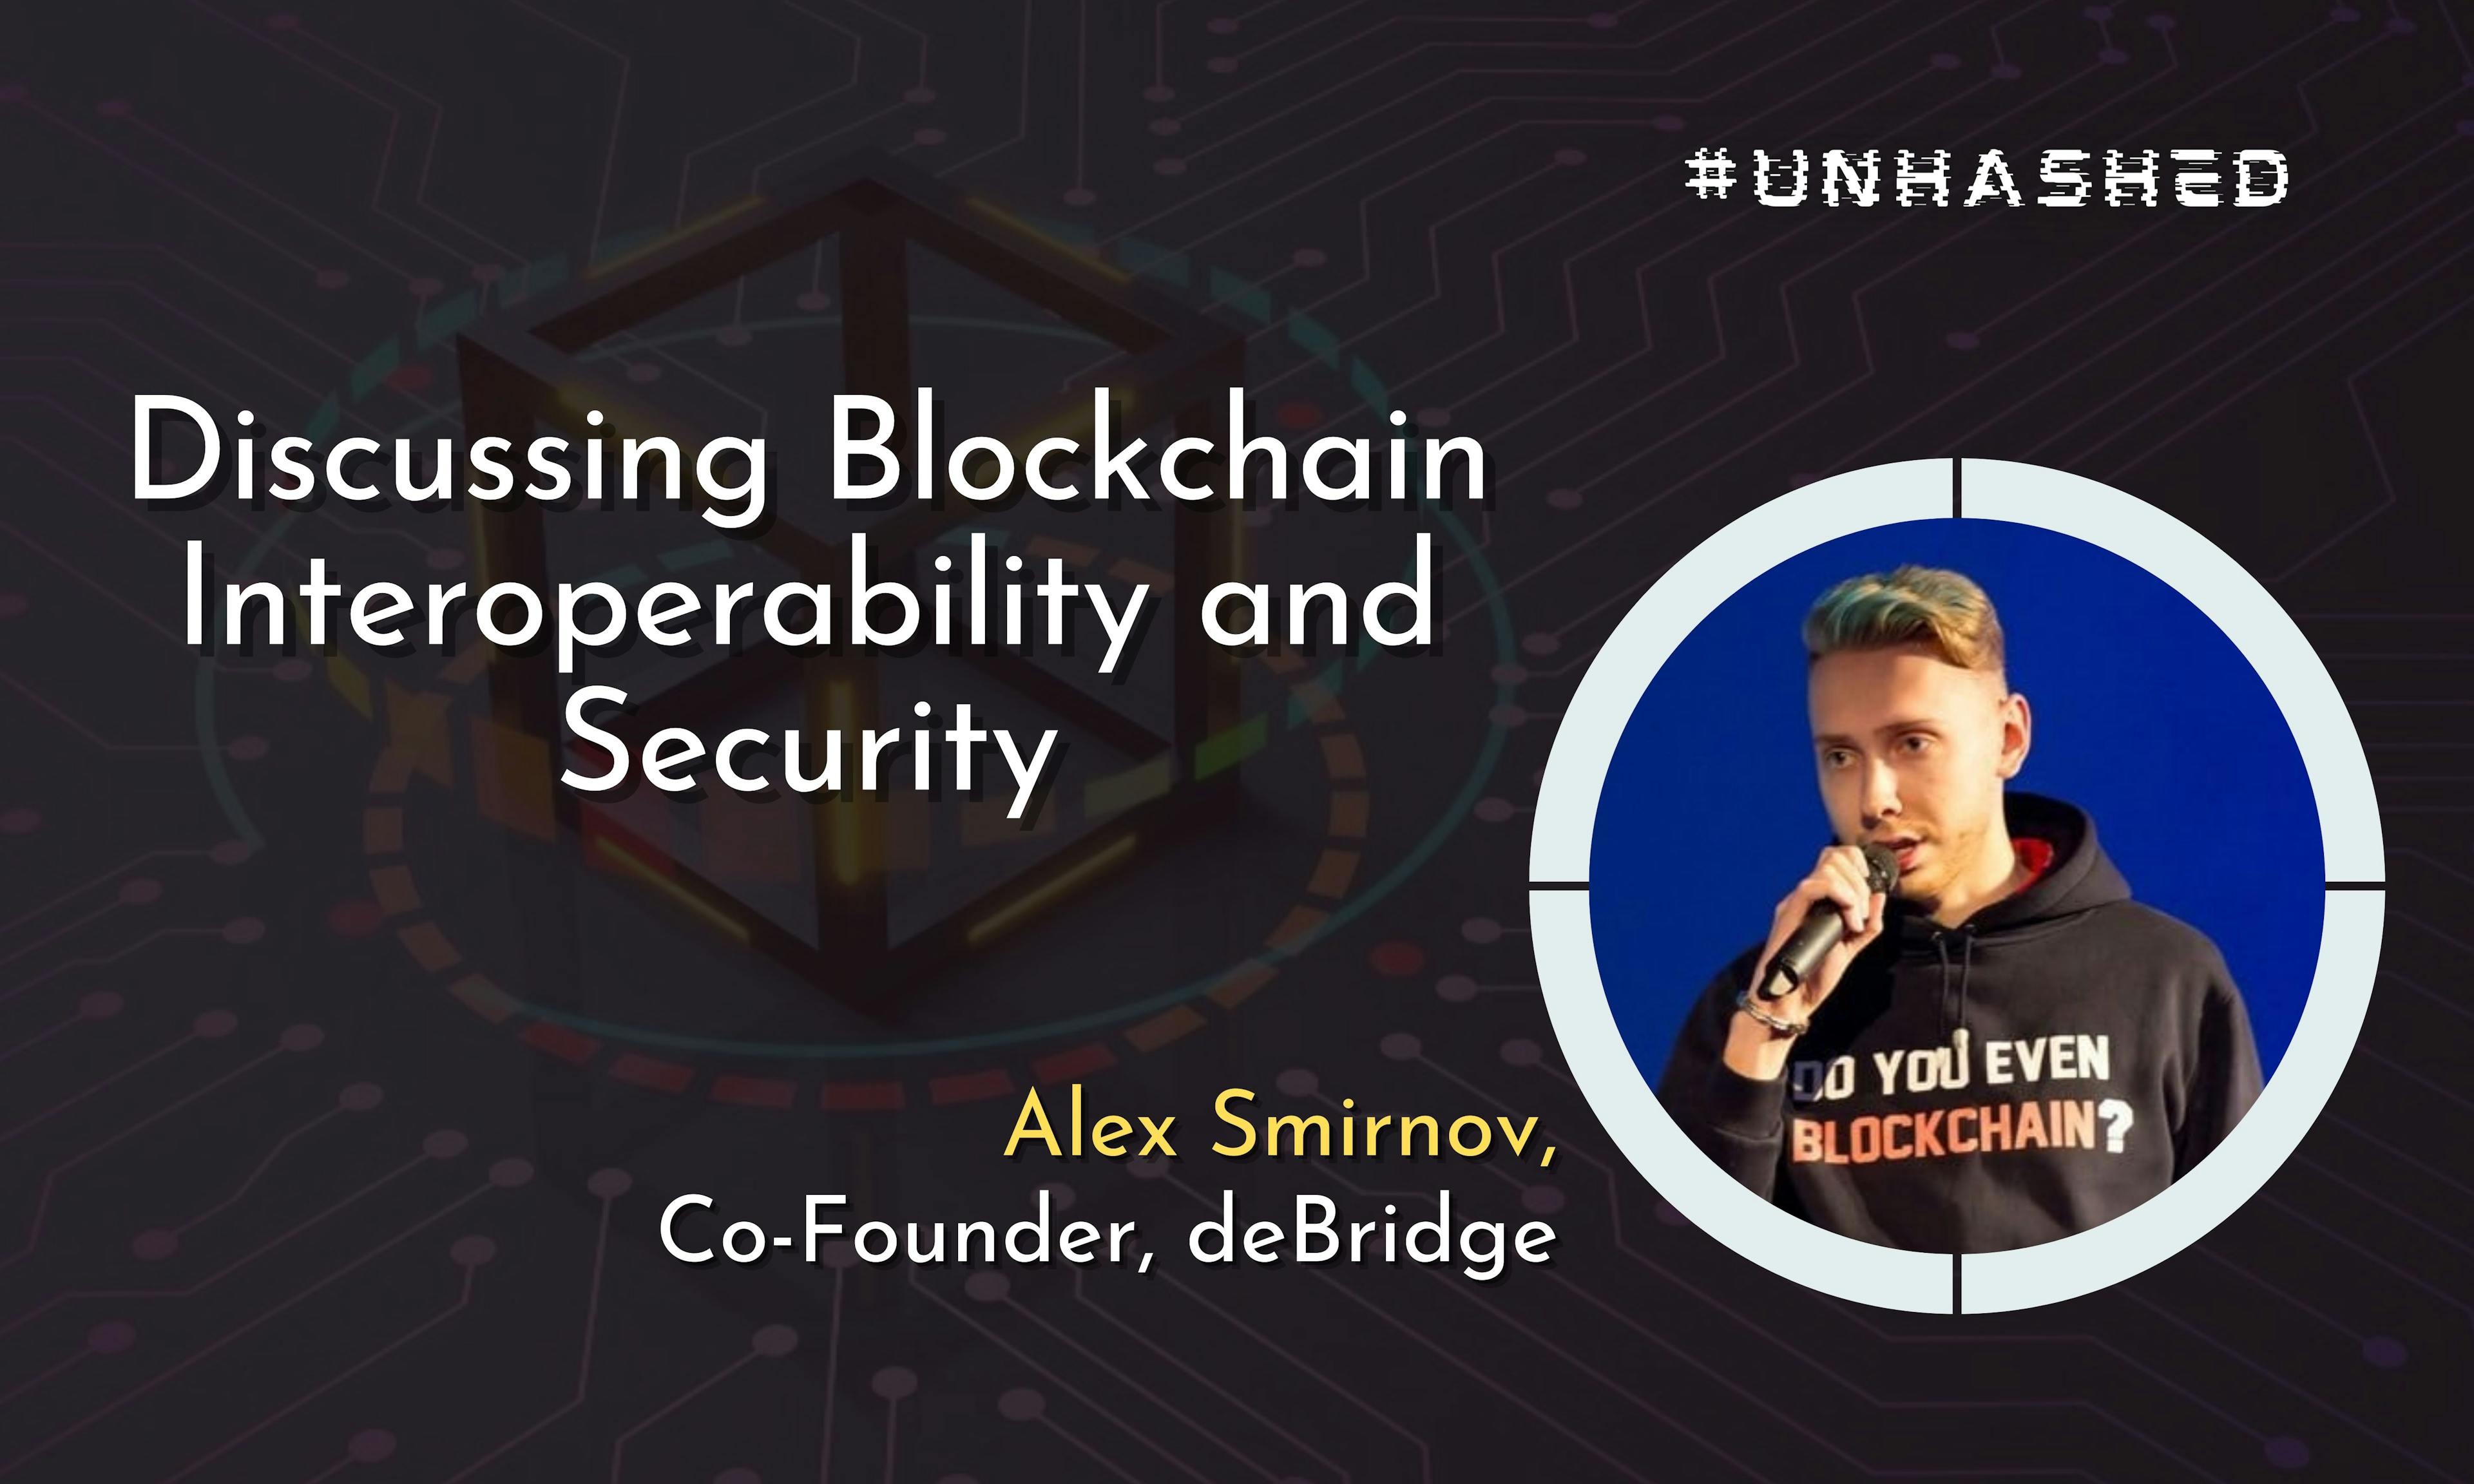 /blockchain-interoperability-is-complex-and-needs-better-focus-on-security-unhashed-17 feature image